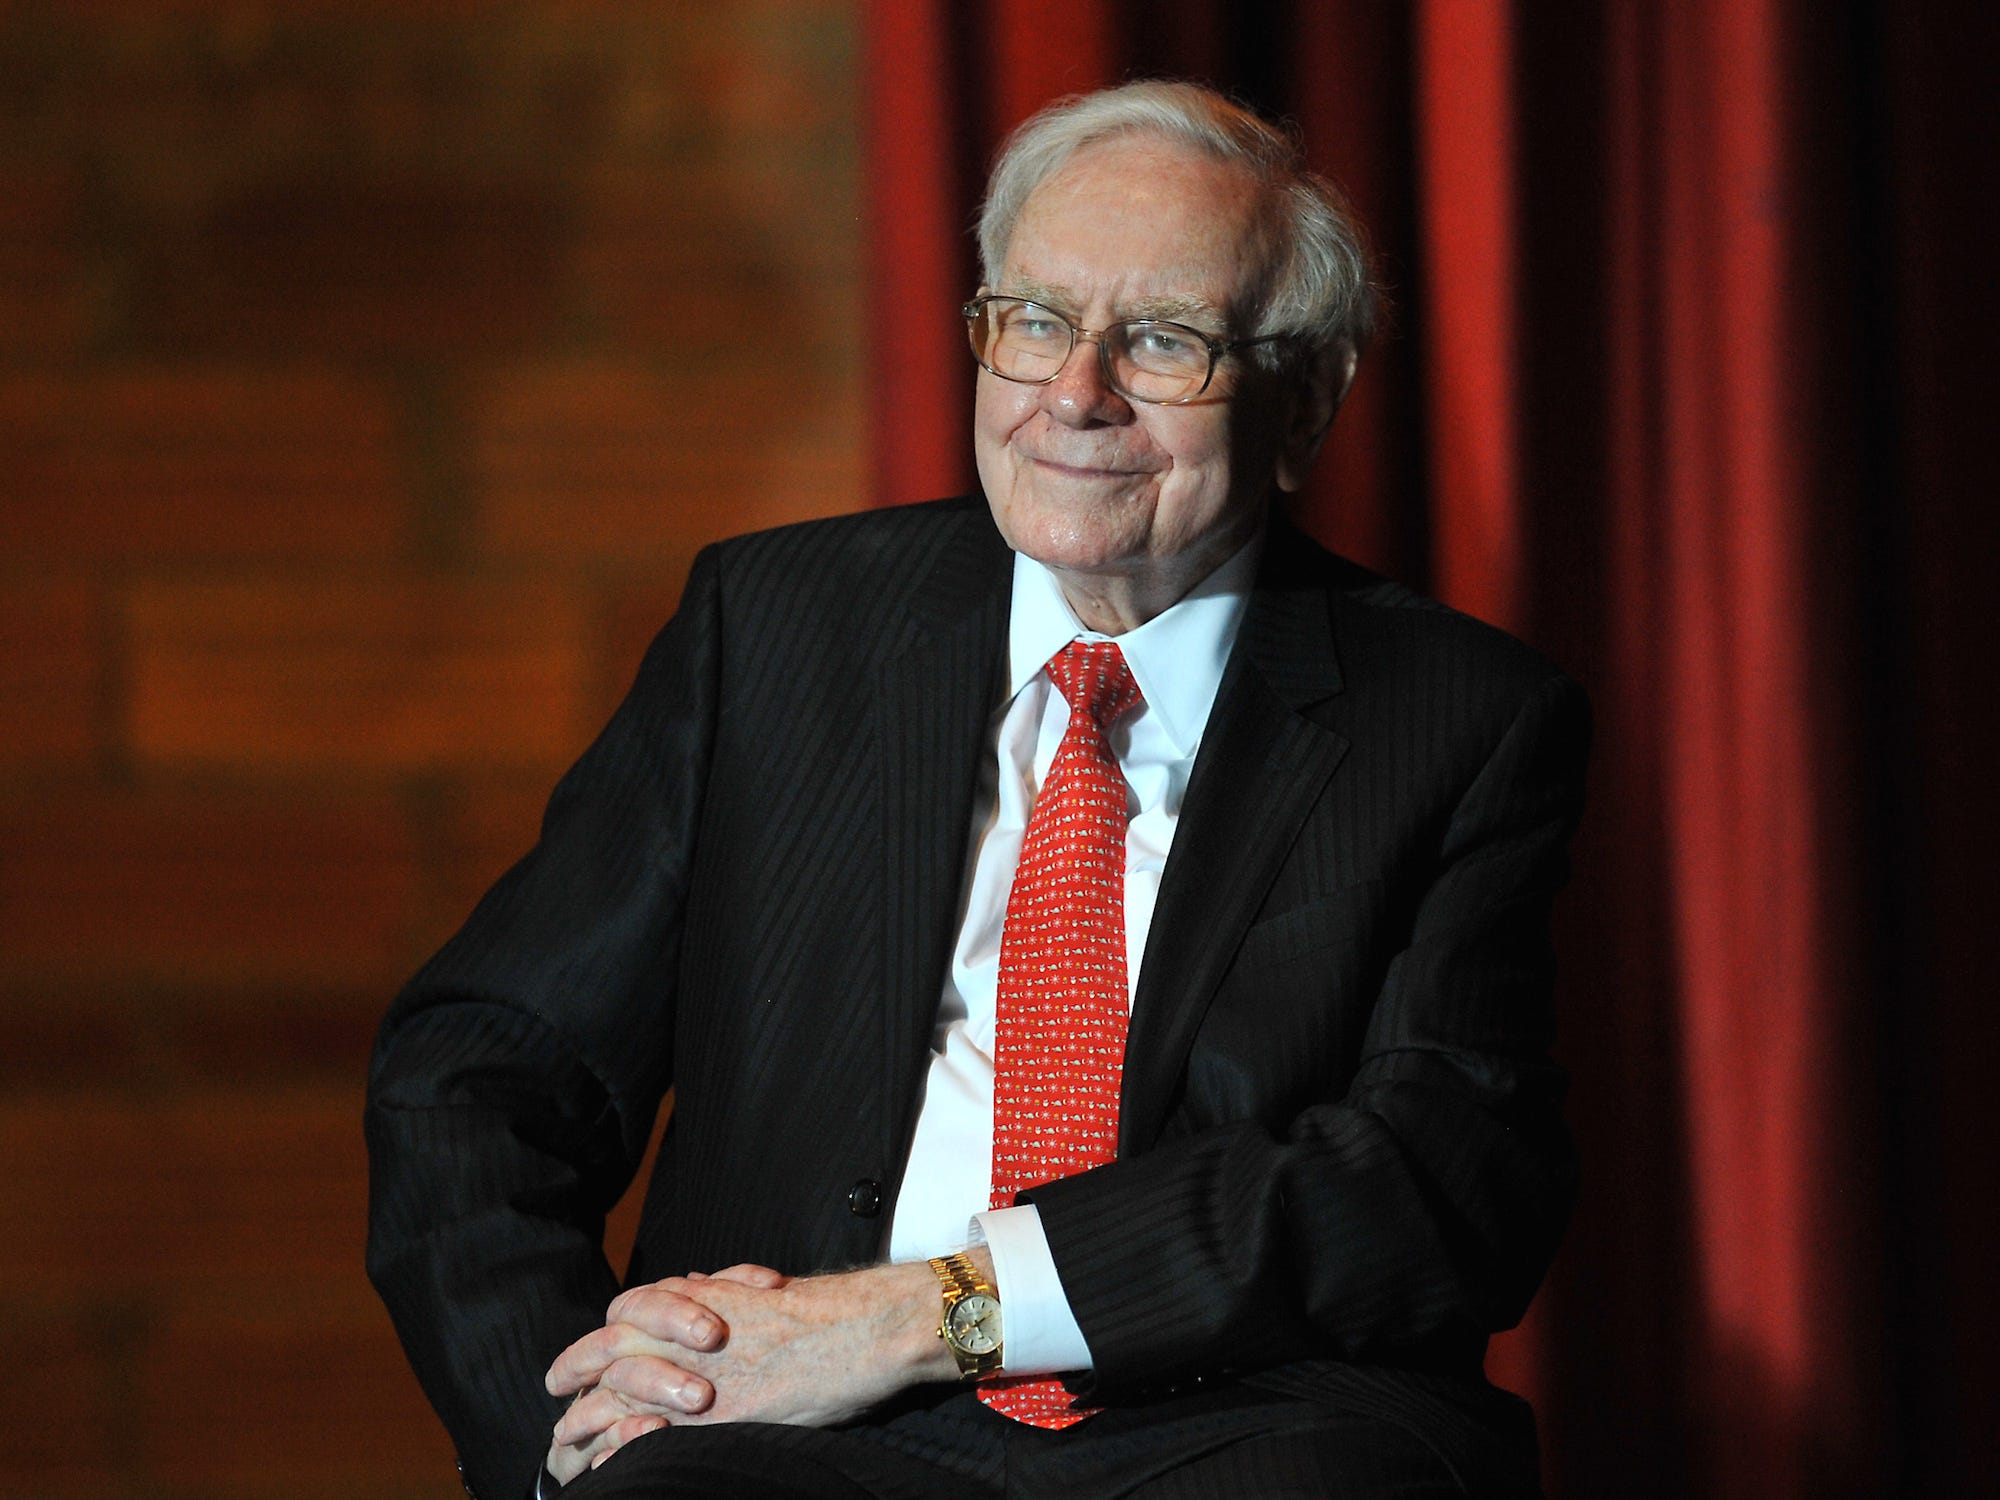 <p>The vast majority of Buffett's net worth is tied to Berkshire Hathaway, his publicly traded holding and investment company. Buffett owns about 38% of the company's Class A shares and less than 0.001% of Class B shares, according to the <a href="https://www.bloomberg.com/billionaires/profiles/warren-e-buffett/#xj4y7vzkg" rel="noopener">Bloomberg Billionaires index</a>.</p><p>Berkshire Hathaway itself owns over <a href="https://markets.businessinsider.com/news/stocks/warren-buffett-berkshire-hathaway-trillion-assets-big-tech-tesla-nvidia-2023-8">$1 trillion in assets</a>, Insider previously reported.</p>